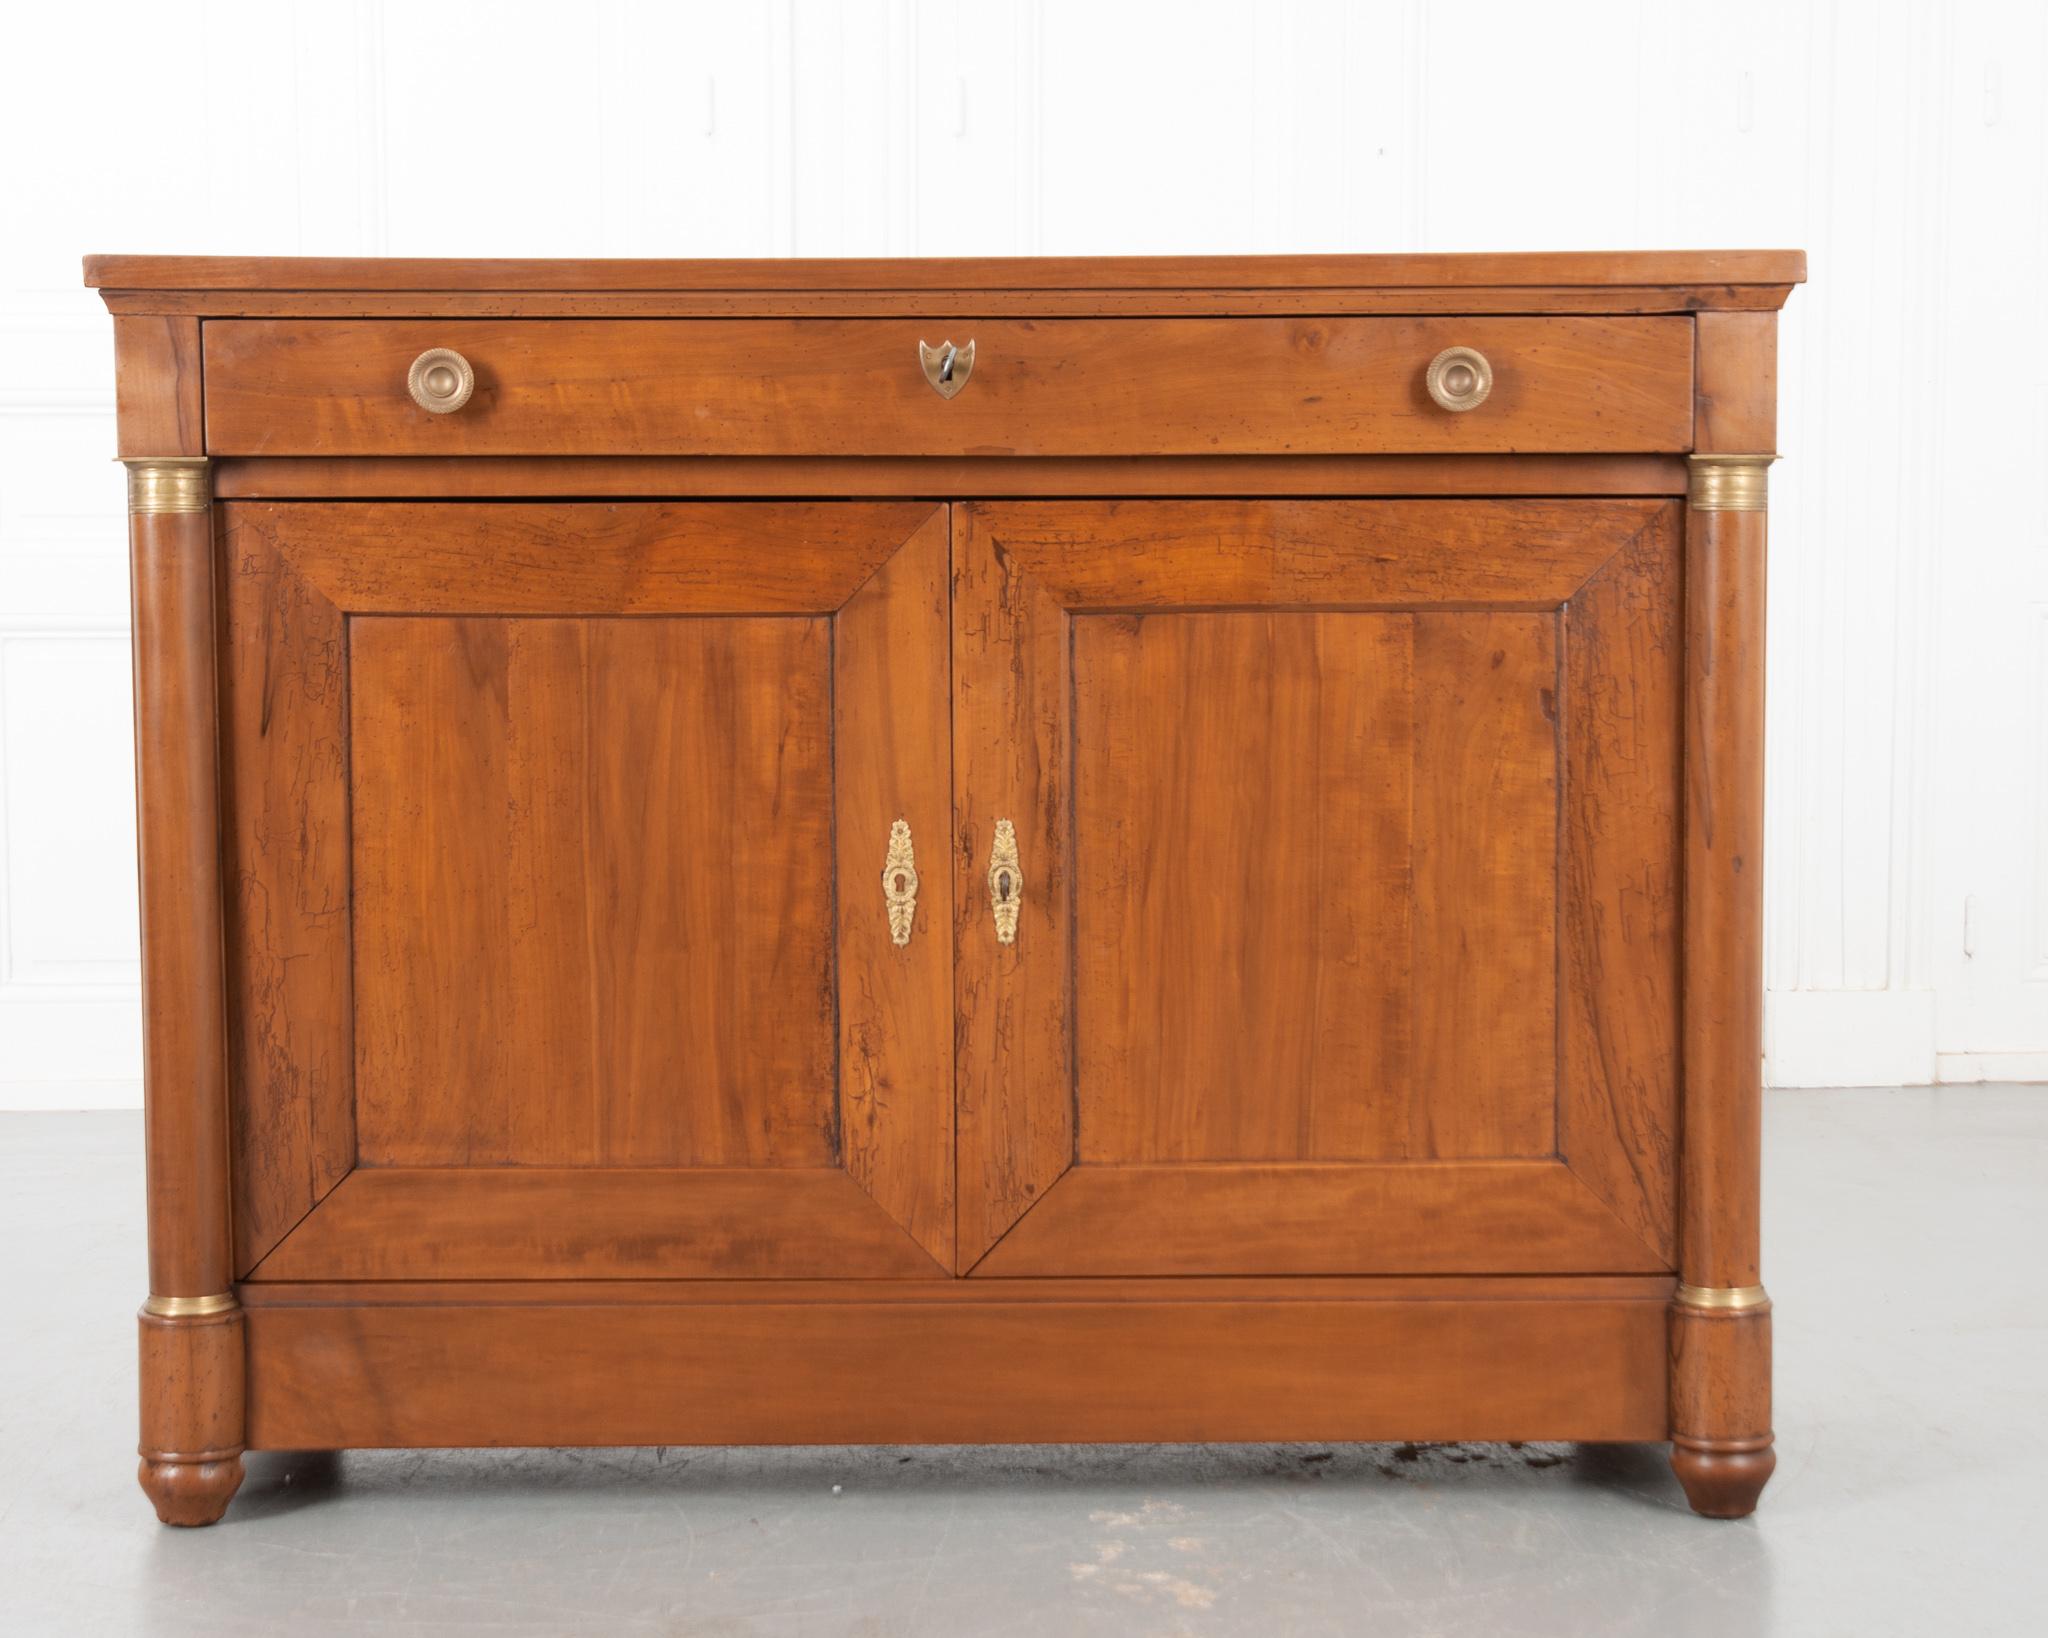 A delightful Empire style fruitwood buffet, made in France circa 1850. This wonderful antique buffet is teeming with Provincial charm. The solid antique fruitwood is beautifully patinated and an unusual wood for an Empire style piece. A single